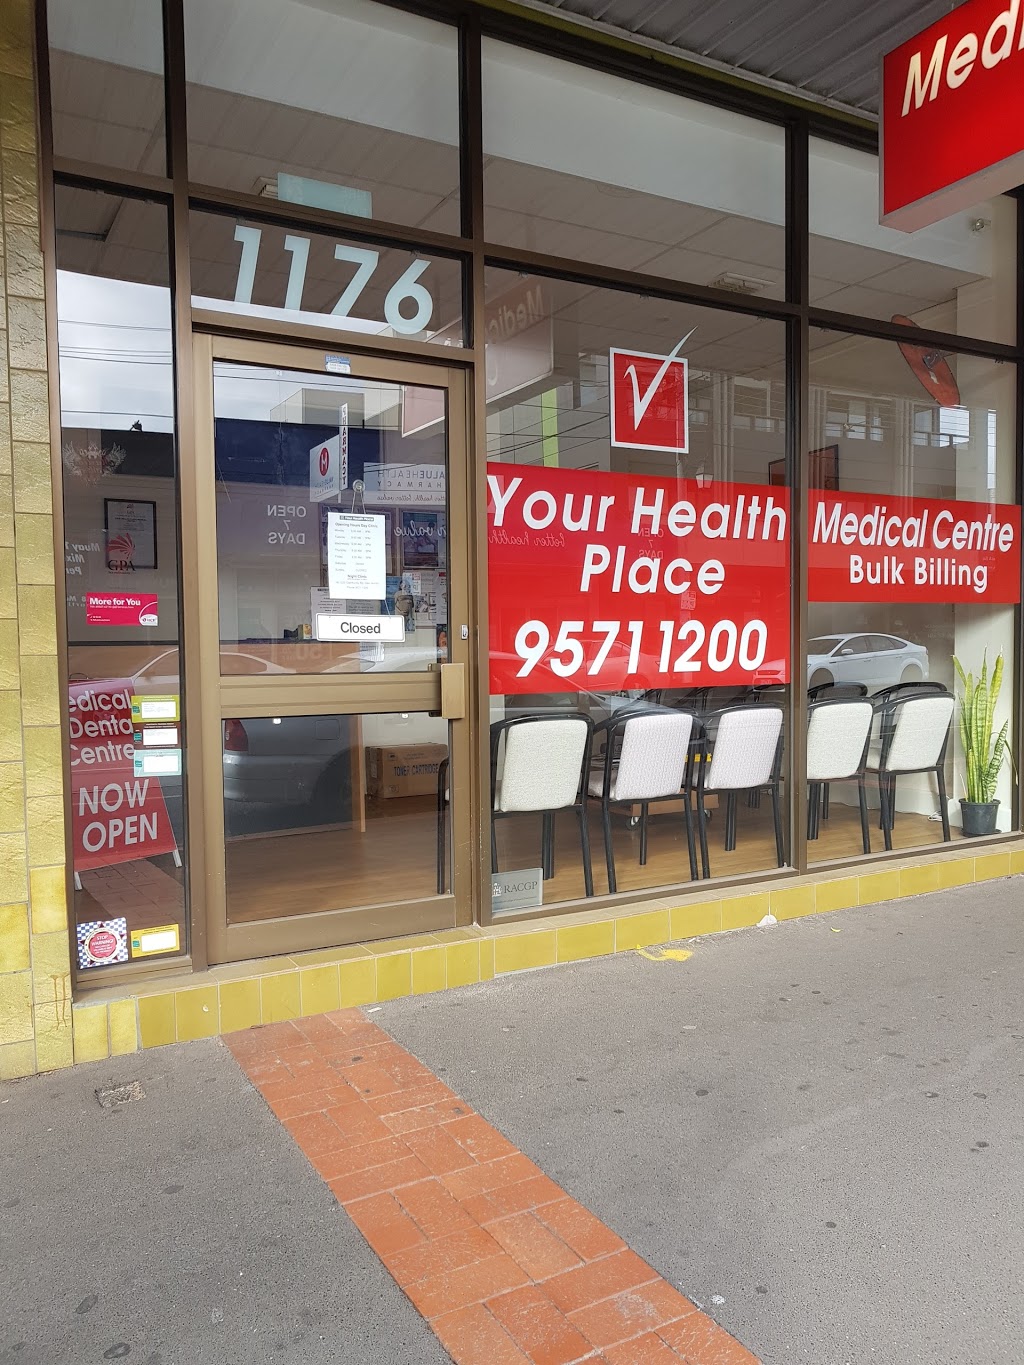 Your Health Place Medical Centres | health | 1176 Glen Huntly Rd, Glen Huntly VIC 3163, Australia